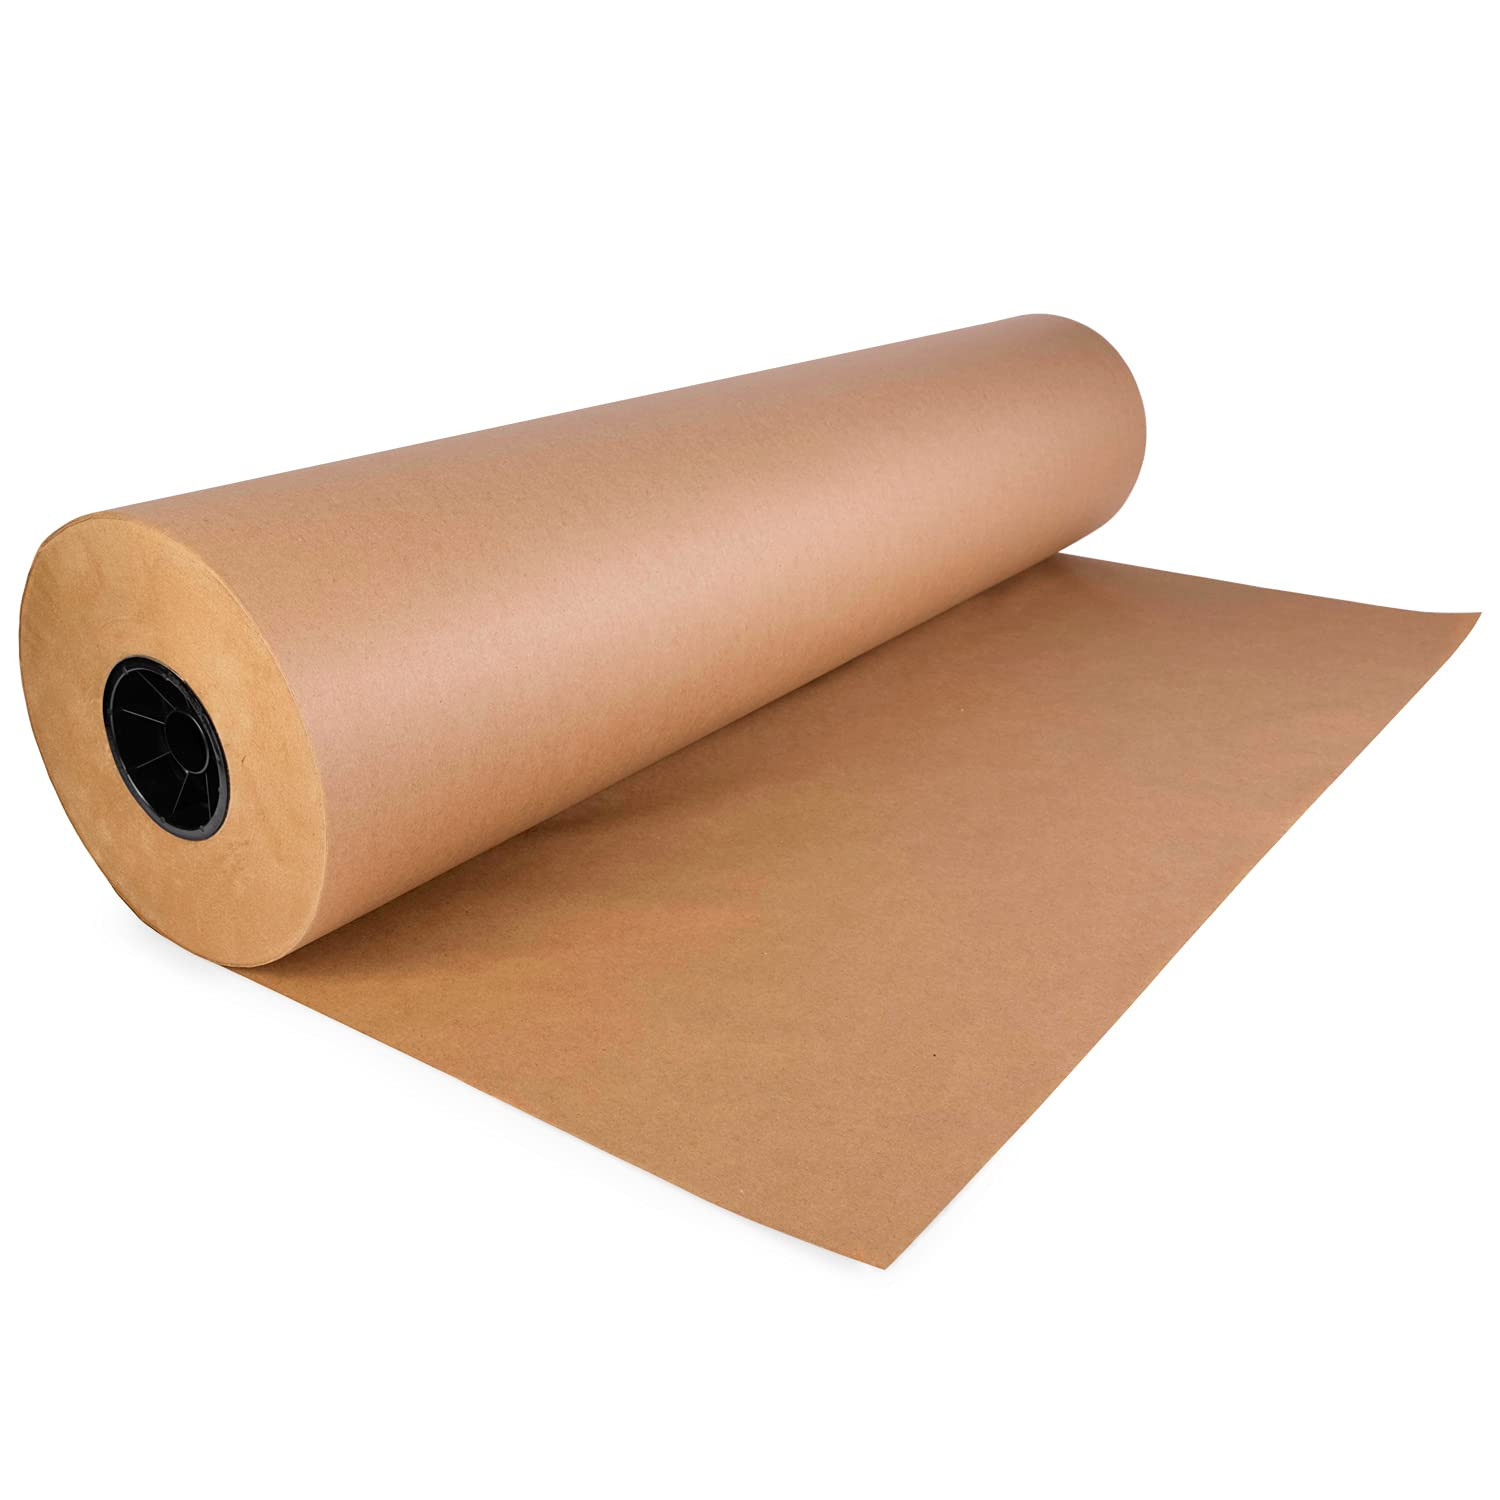 IDL Packaging Tear Resistant Kraft Paper 18 x 150' - Extra Durable 50 lbs  Thick, Brown Roll - 100% Recyclable Natural Kraft Wrapping Paper (Pack of 6  Roll) 